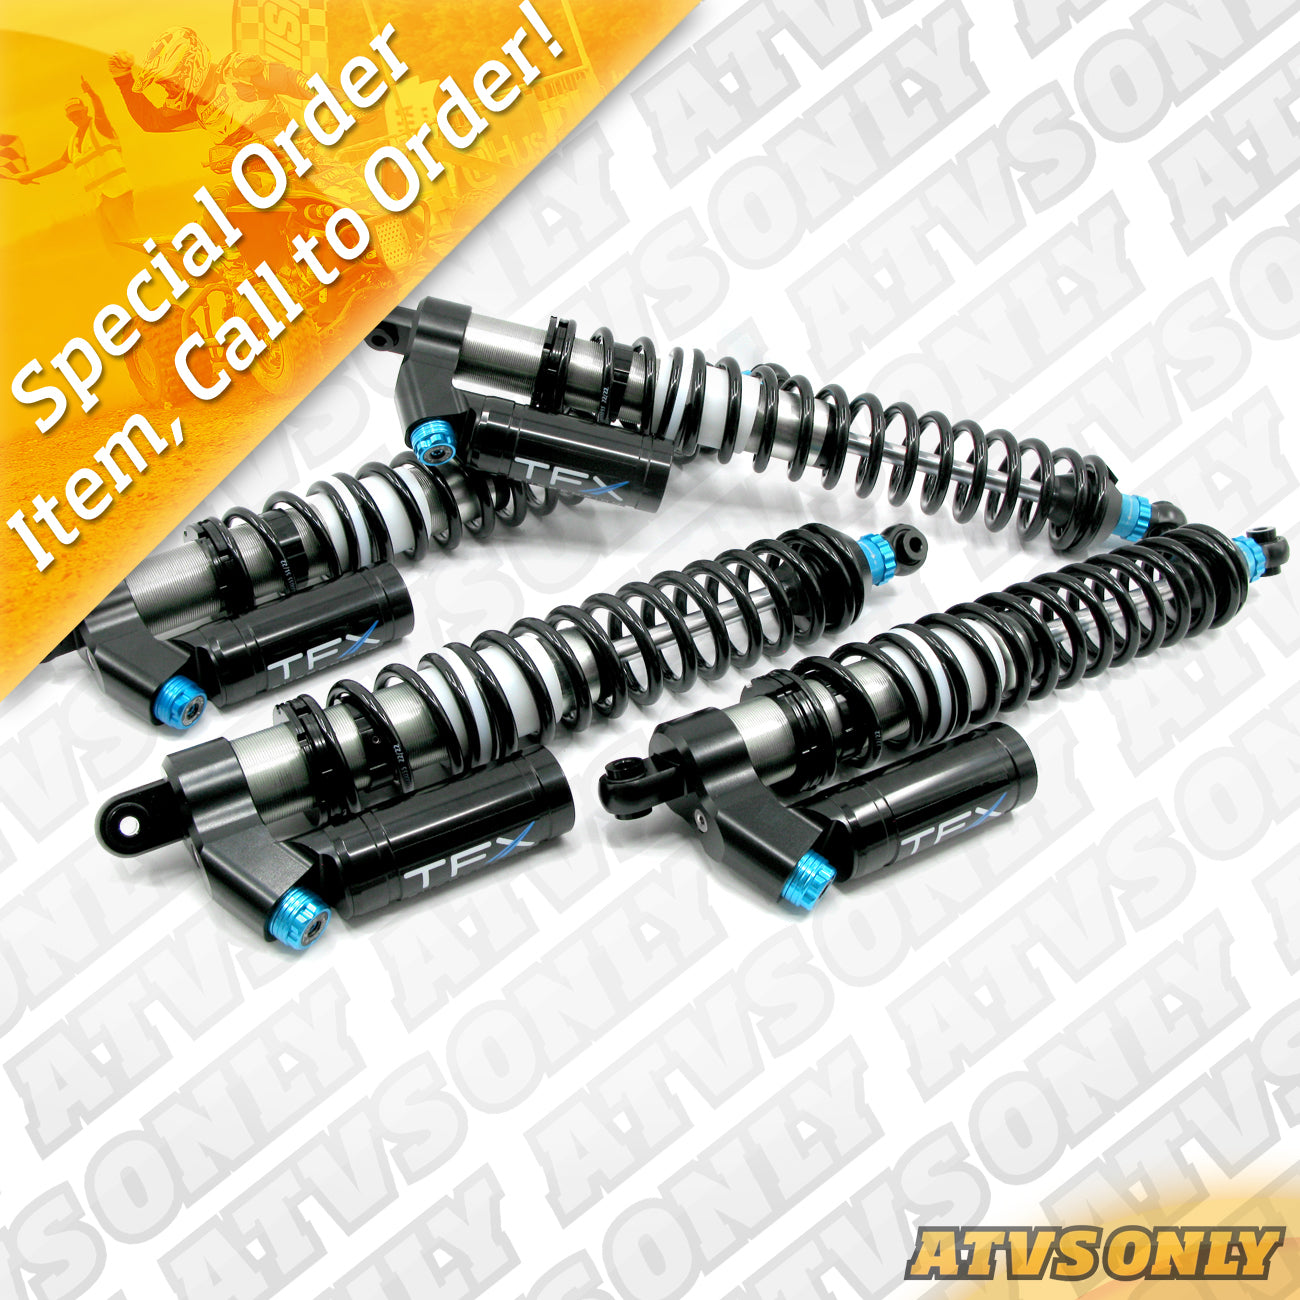 Suspension – Shock Absorbers for 4x4 CanAm and Polaris Applications